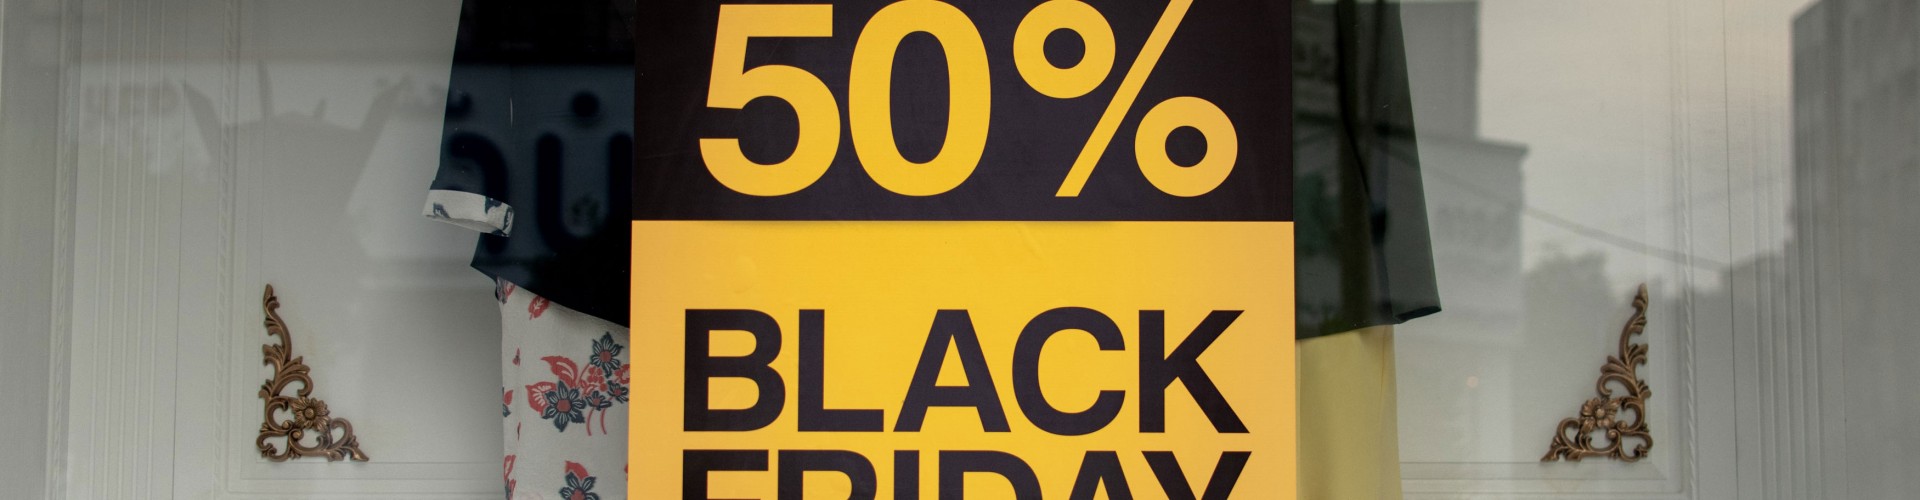 Black and yellow poster in a shop window advertising Black Friday